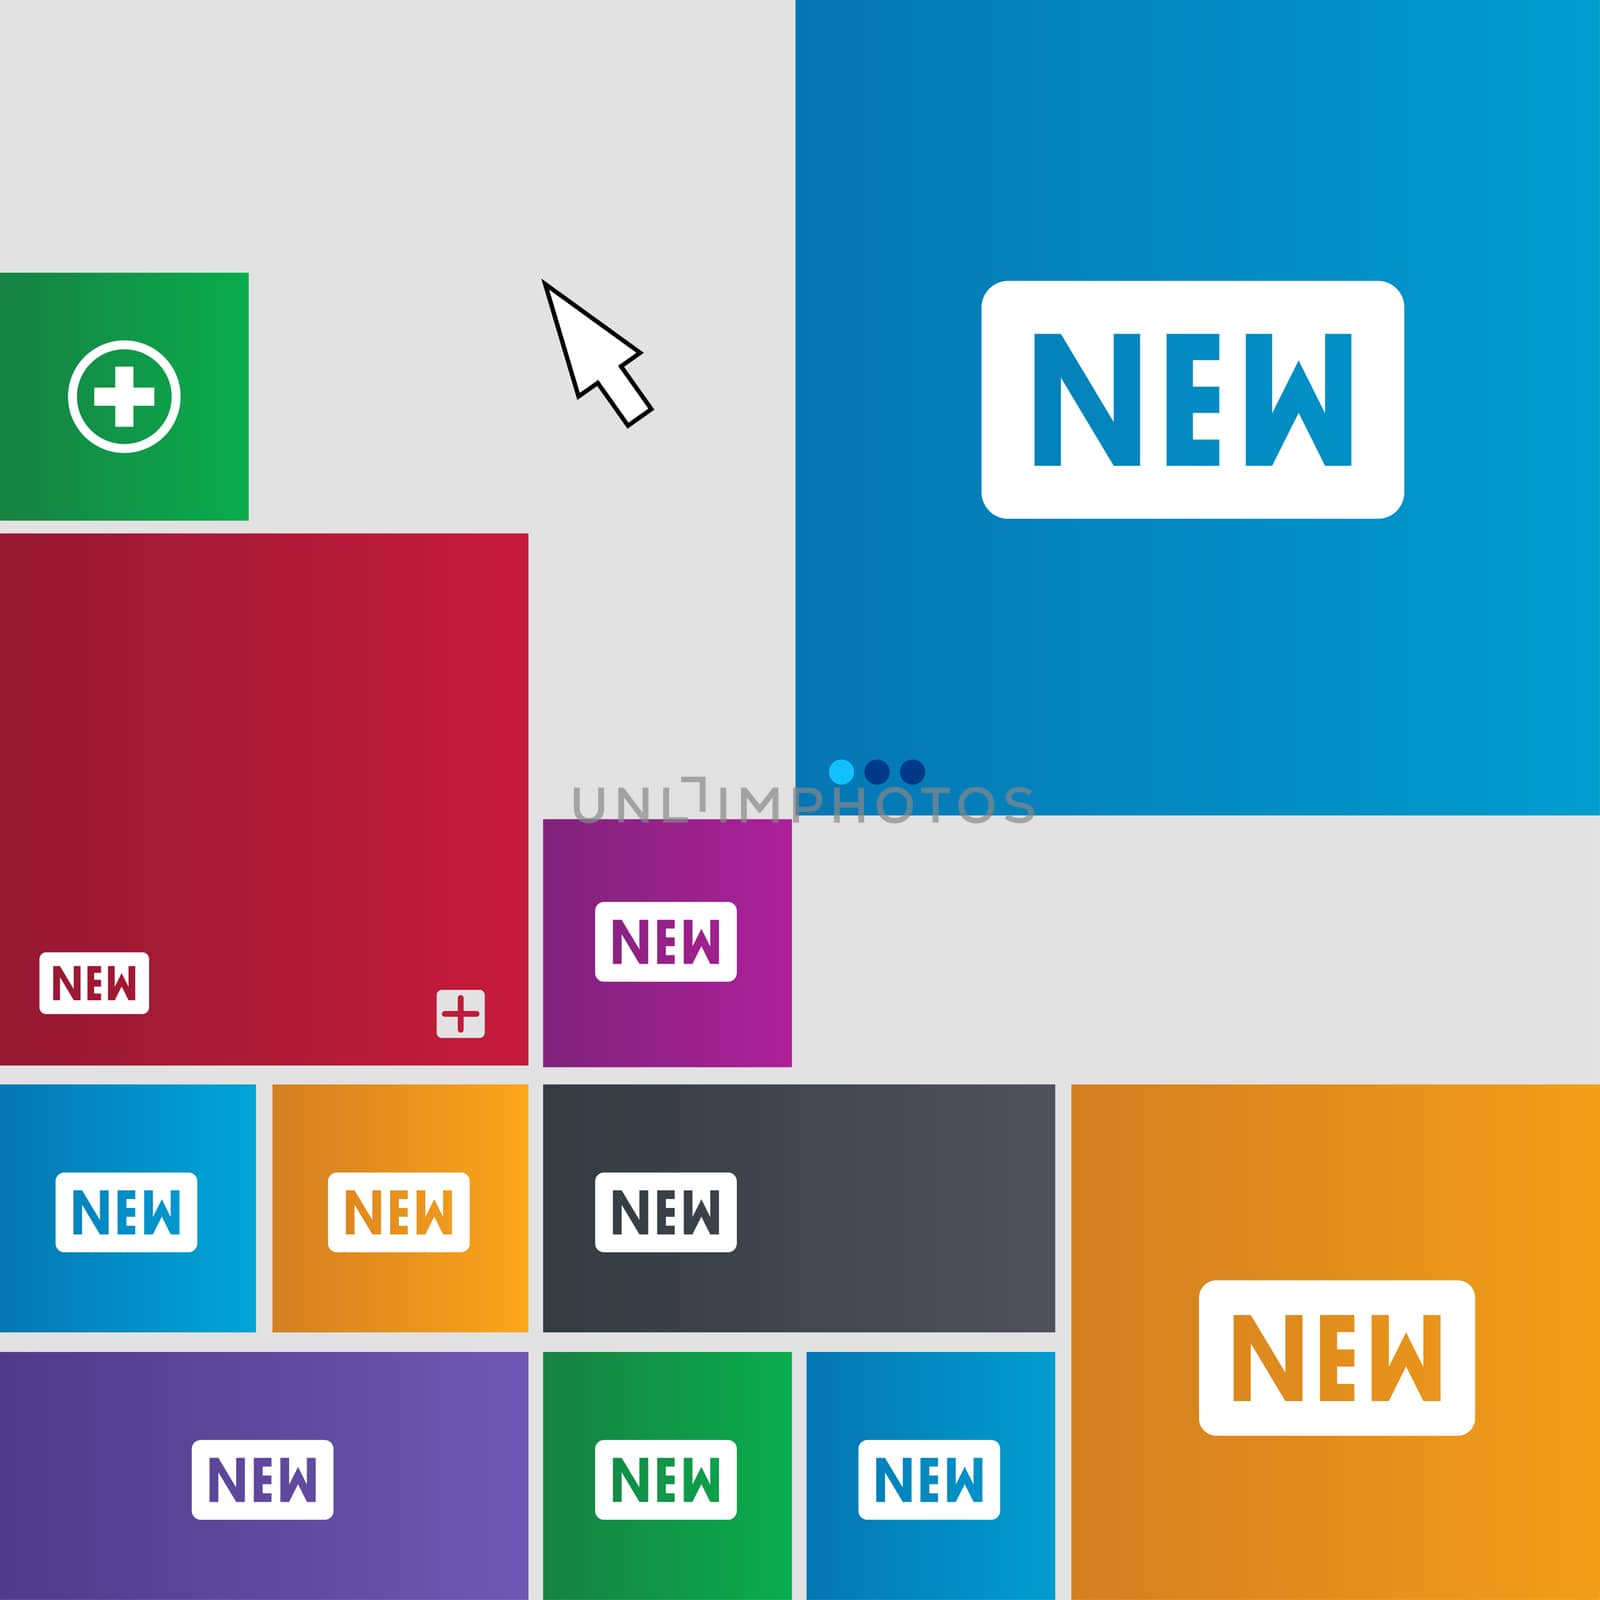 New icon sign. Metro style buttons. Modern interface website buttons with cursor pointer. illustration